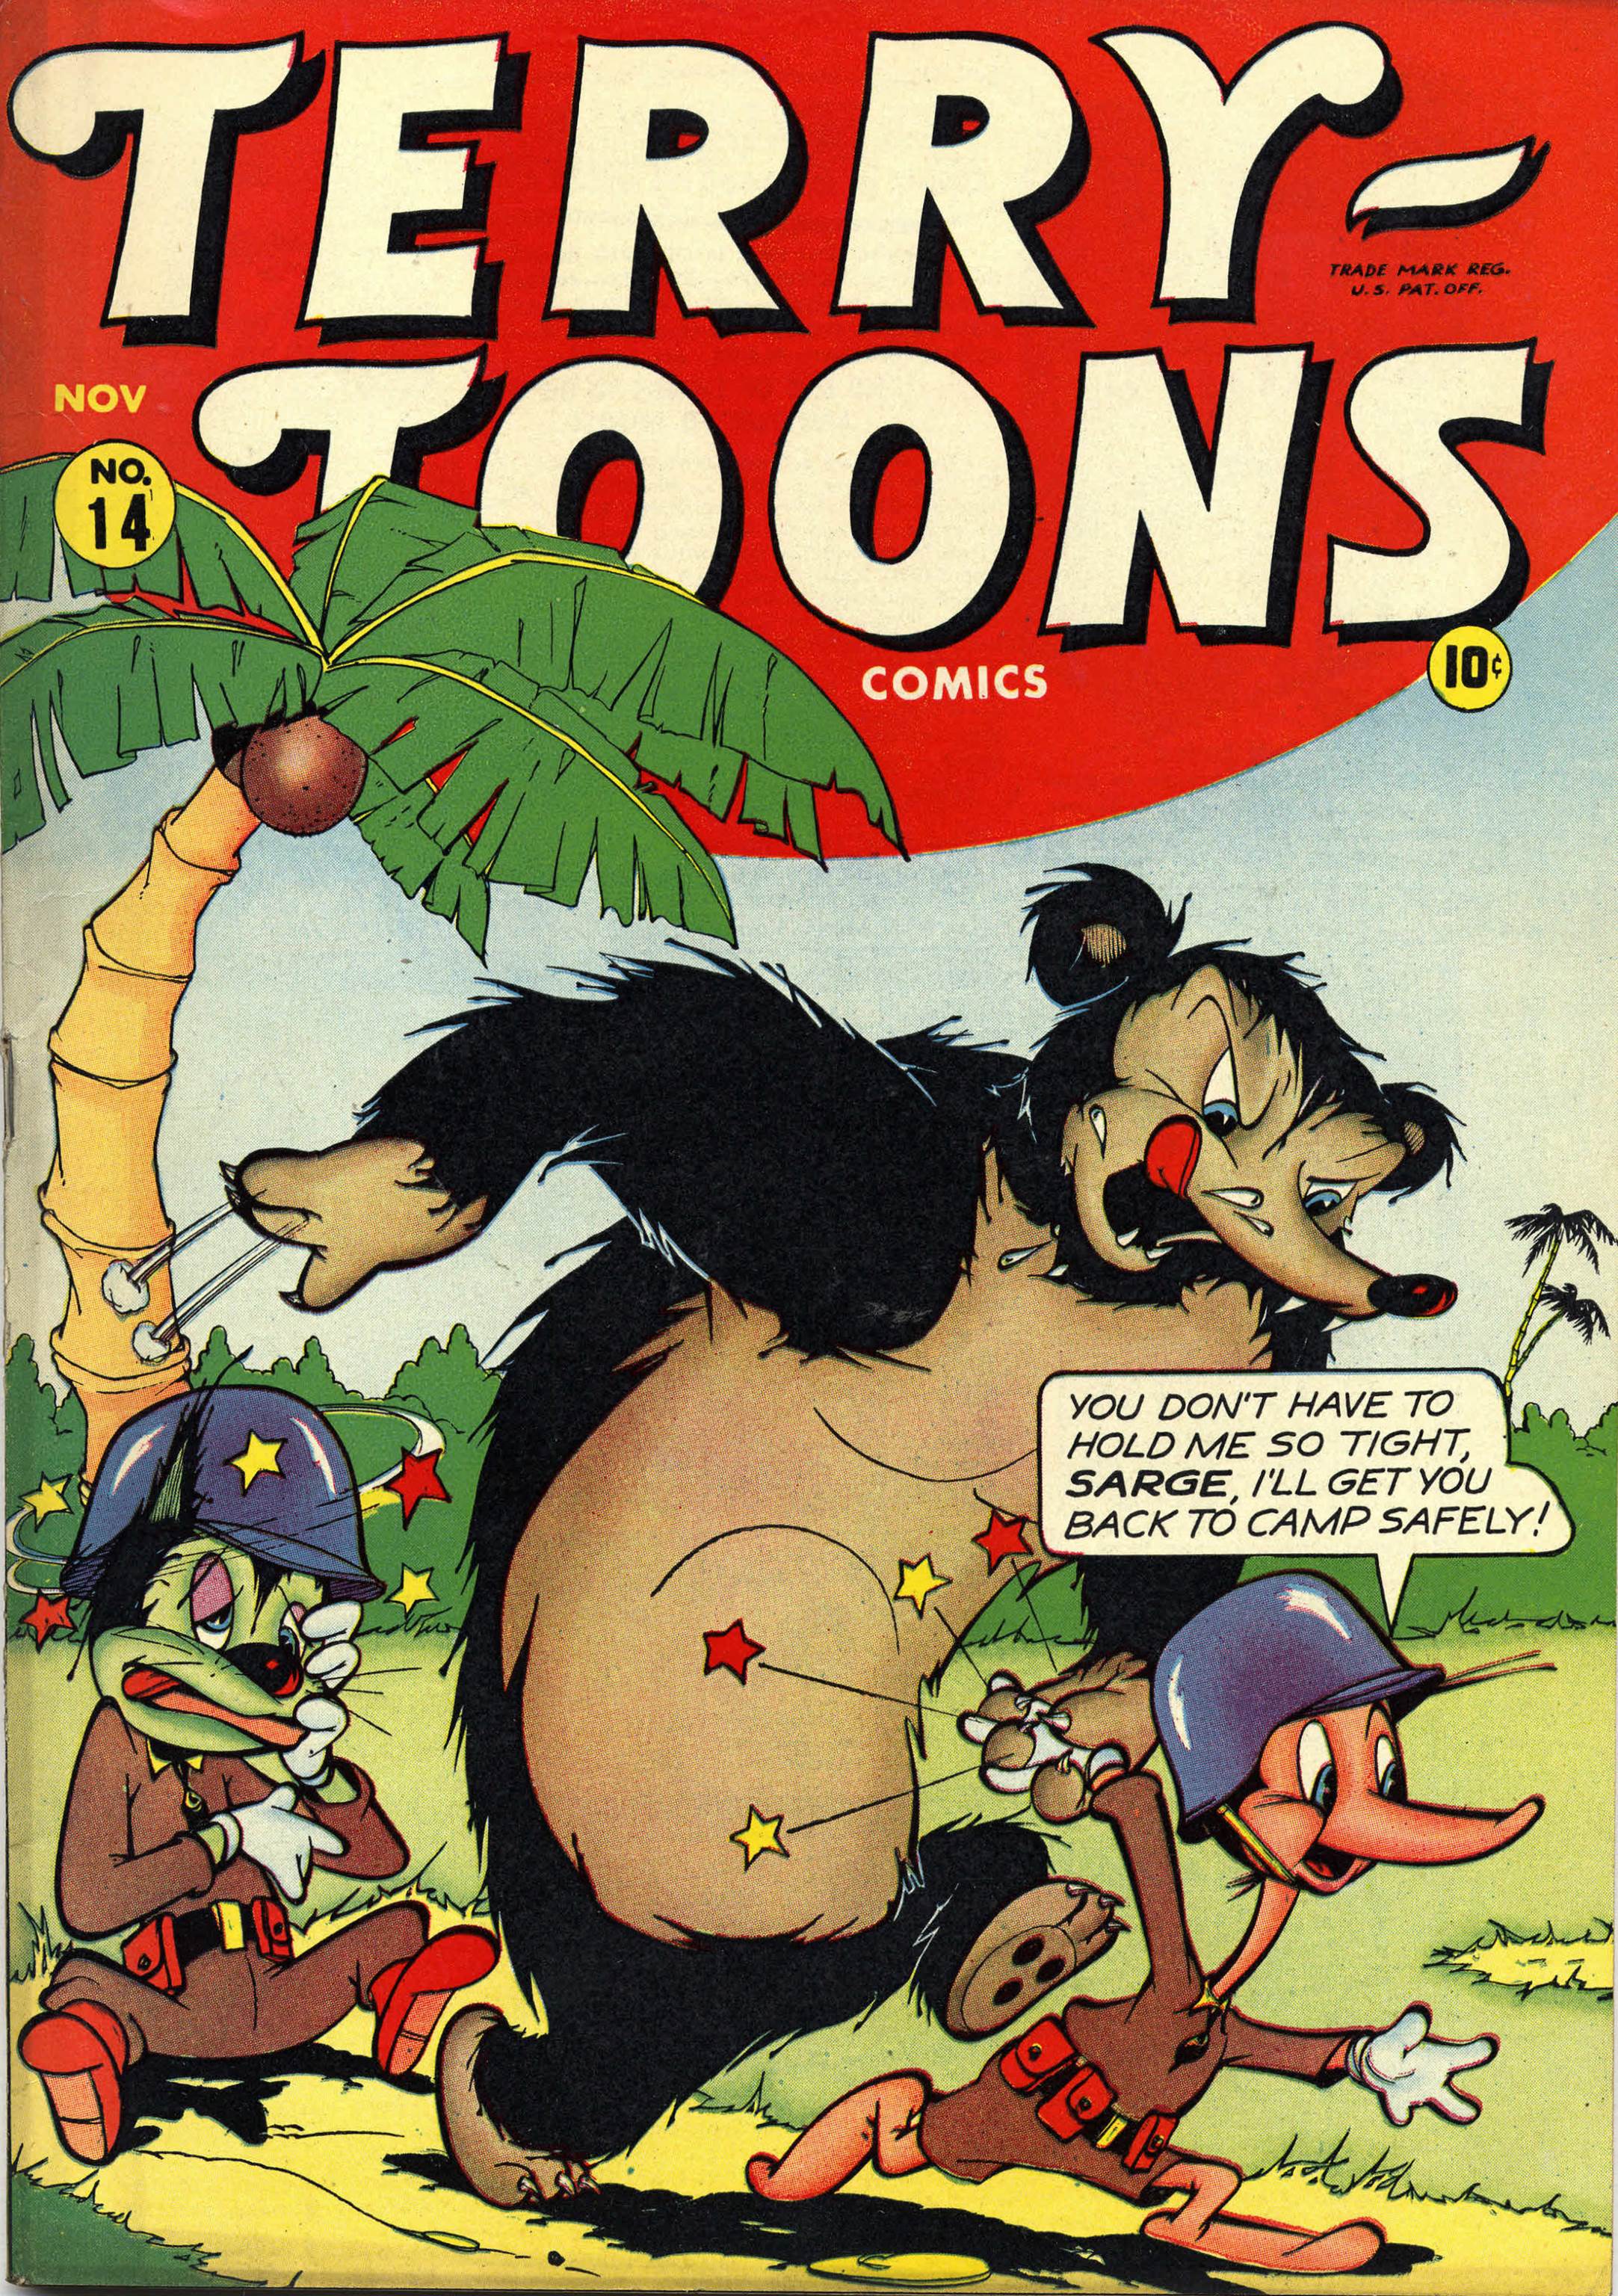 Read online Terry-Toons Comics comic -  Issue #14 - 1